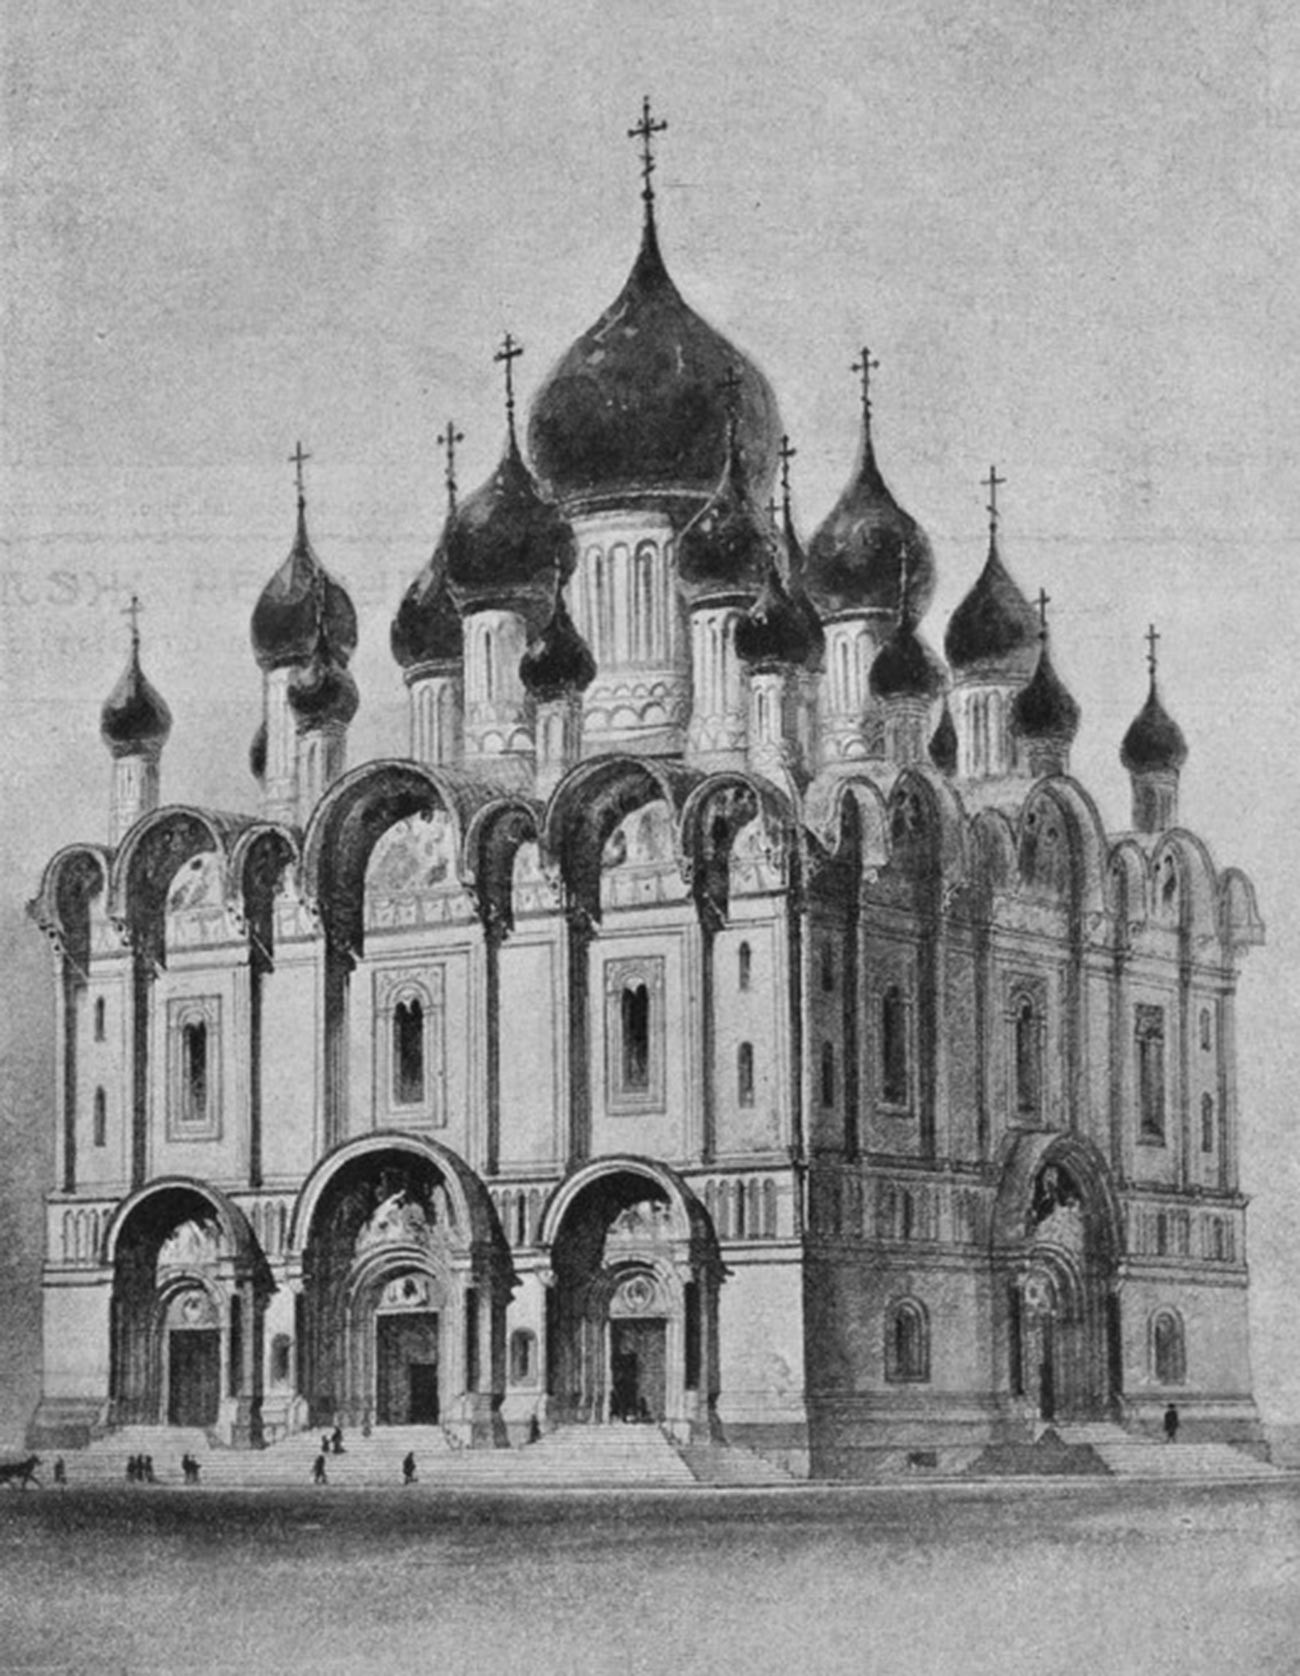 Alexander Nevsky Cathedral pictured in 1904 under the project of architec A. Pomerantsev